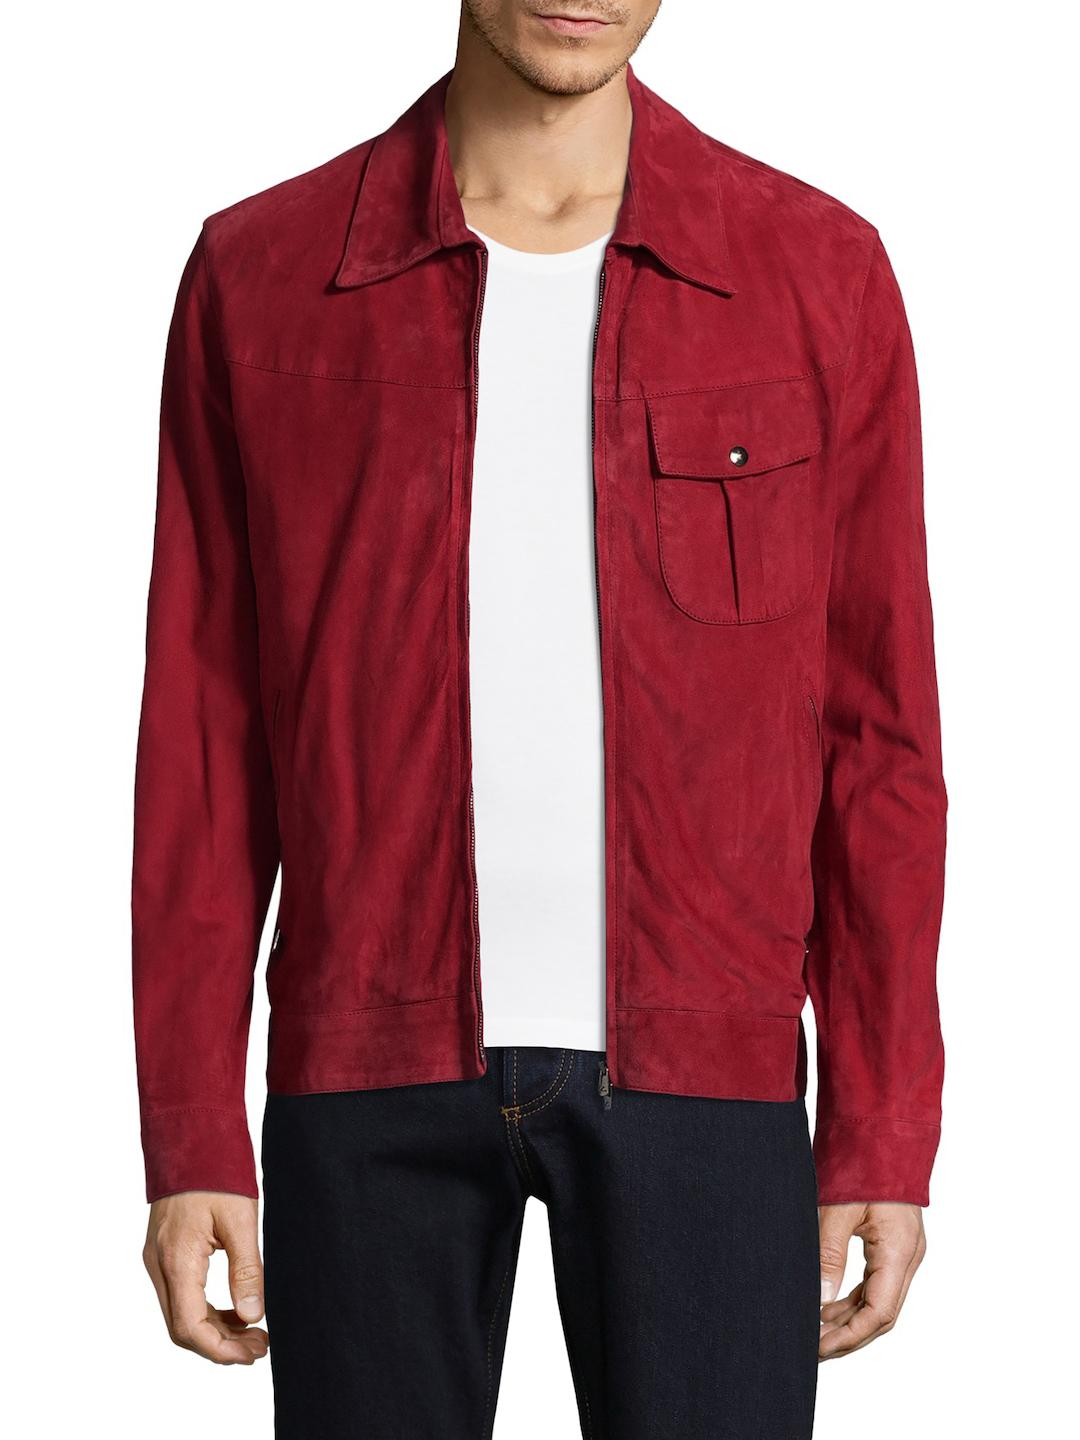 Isaia Suede Spread Collar Jacket in Red for Men - Lyst